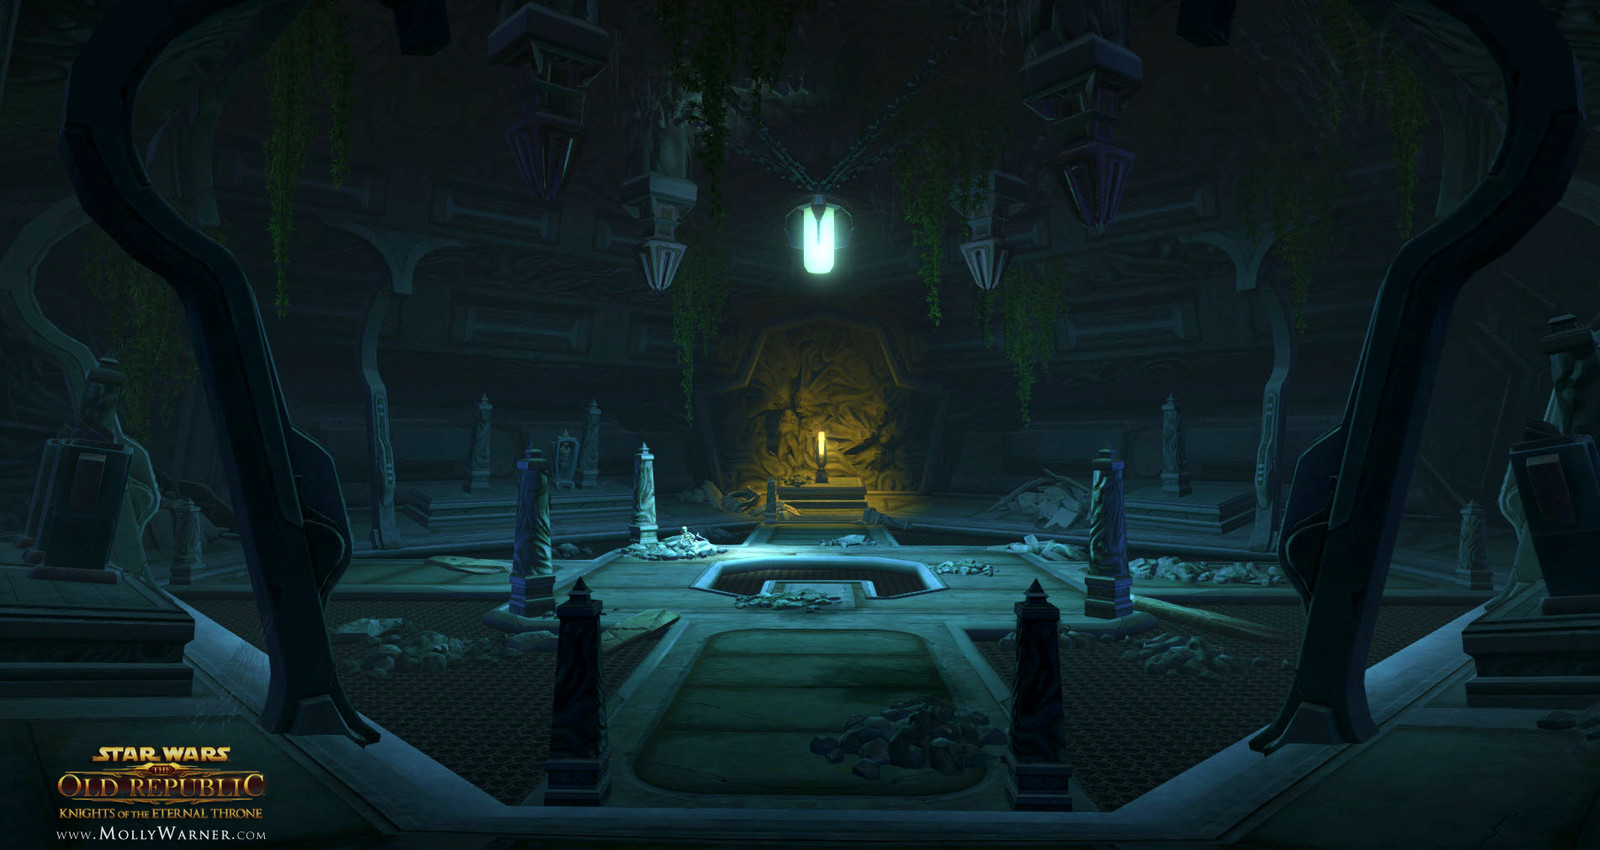 Sith Temple Catacombs (Boss fight area)